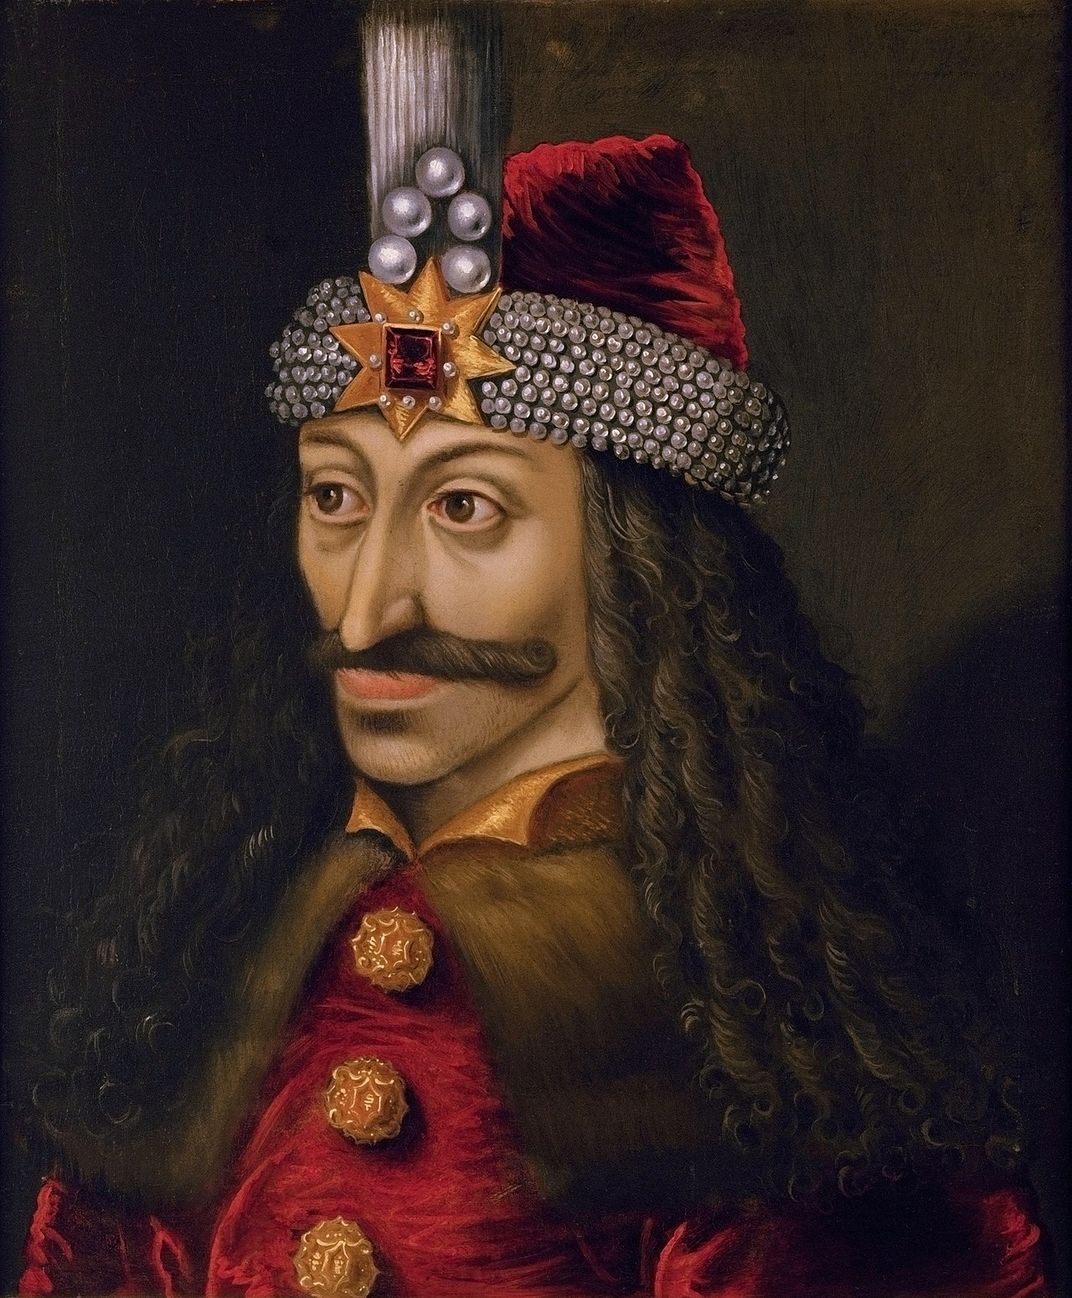 Painting of Vlad the Impaler